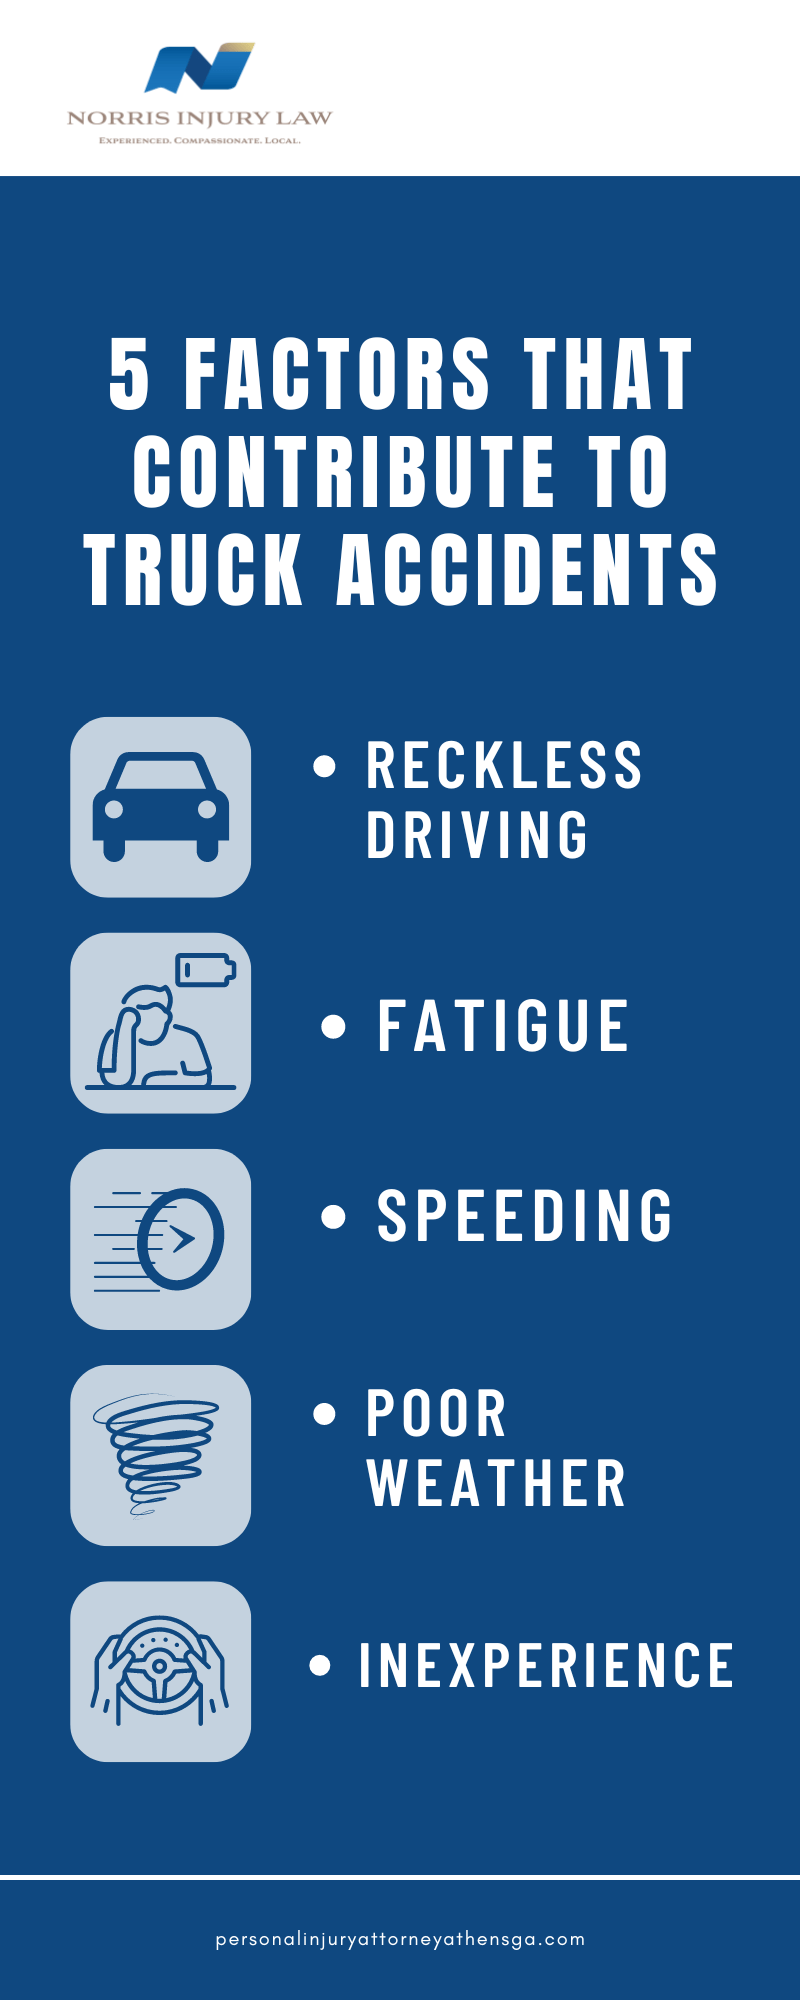 5 Factors That Contribute To Truck Accidents Infographic